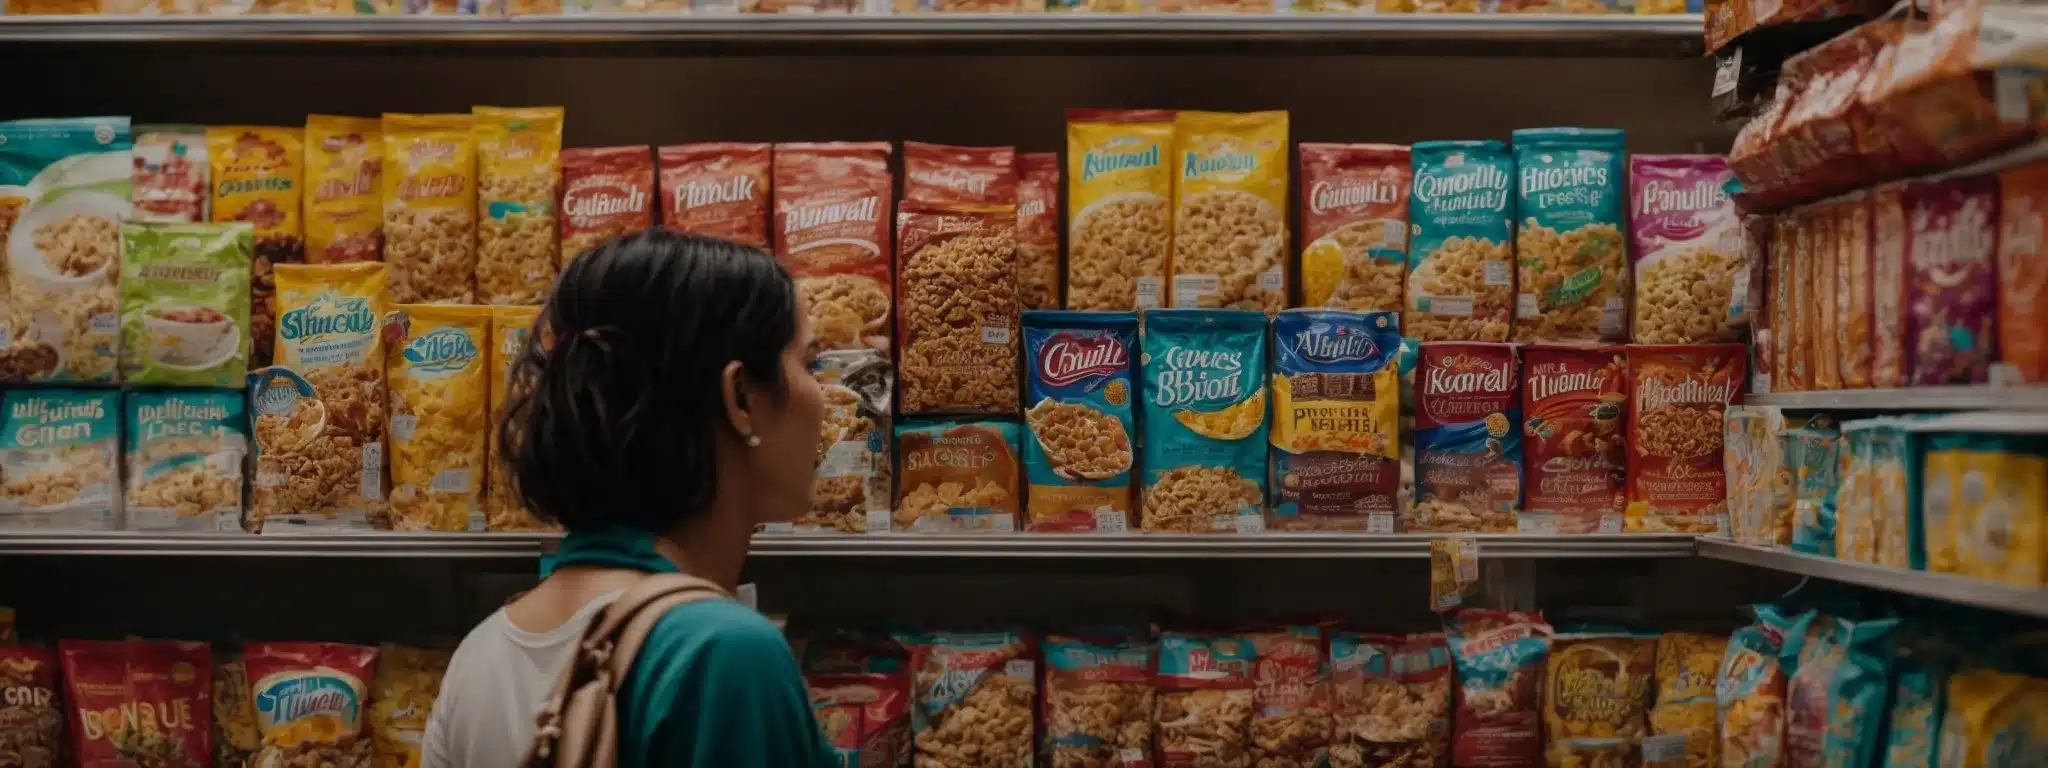 A Shopper Stands In Front Of A Vibrant Cereal Display, Reaching For A Boldly Designed Box That Stands Out Among The Rest.